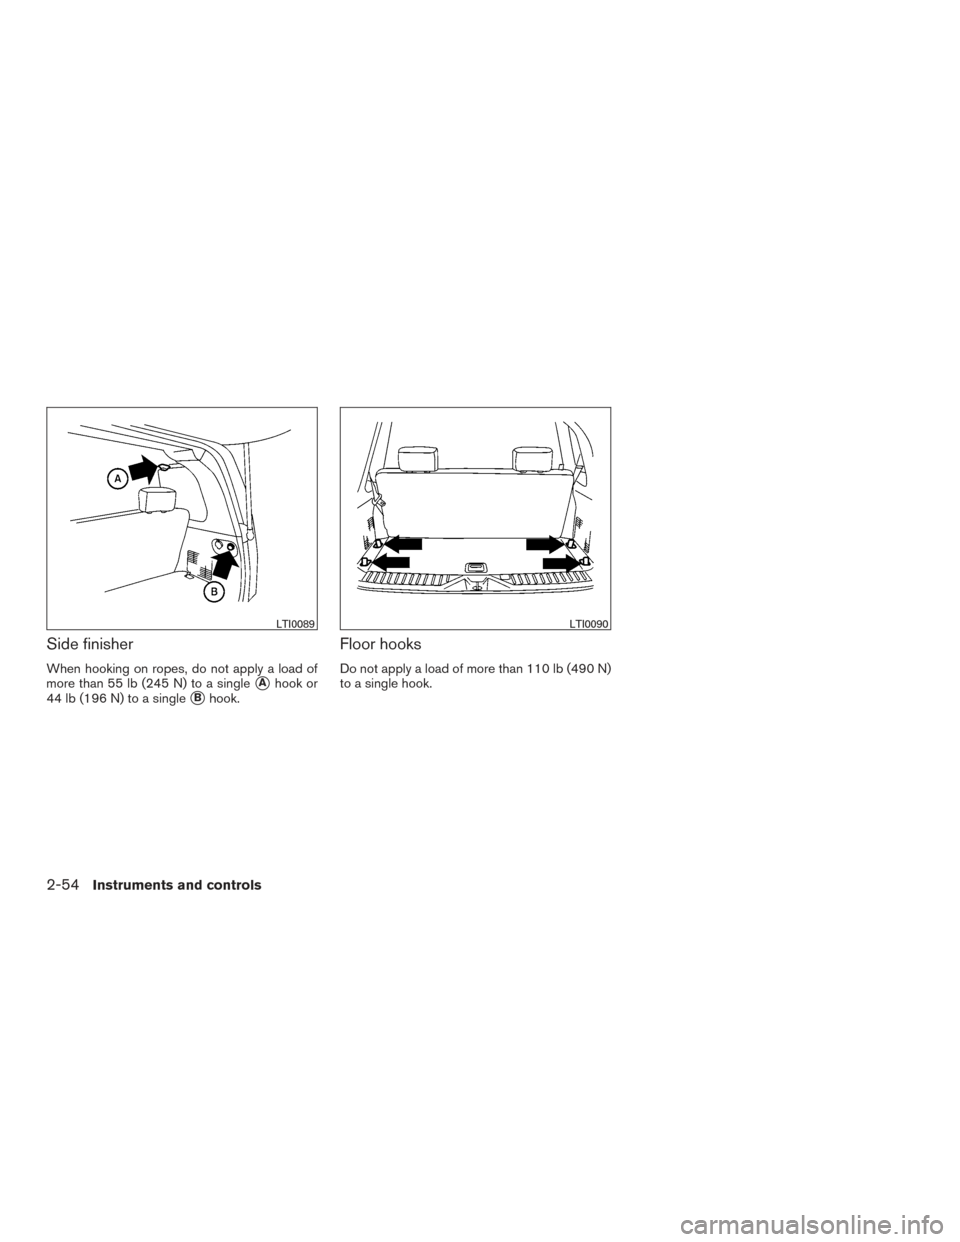 NISSAN ARMADA 2015 1.G Owners Manual Side finisher
When hooking on ropes, do not apply a load of
more than 55 lb (245 N) to a single
Ahook or
44 lb (196 N) to a single
Bhook.
Floor hooks
Do not apply a load of more than 110 lb (490 N)
